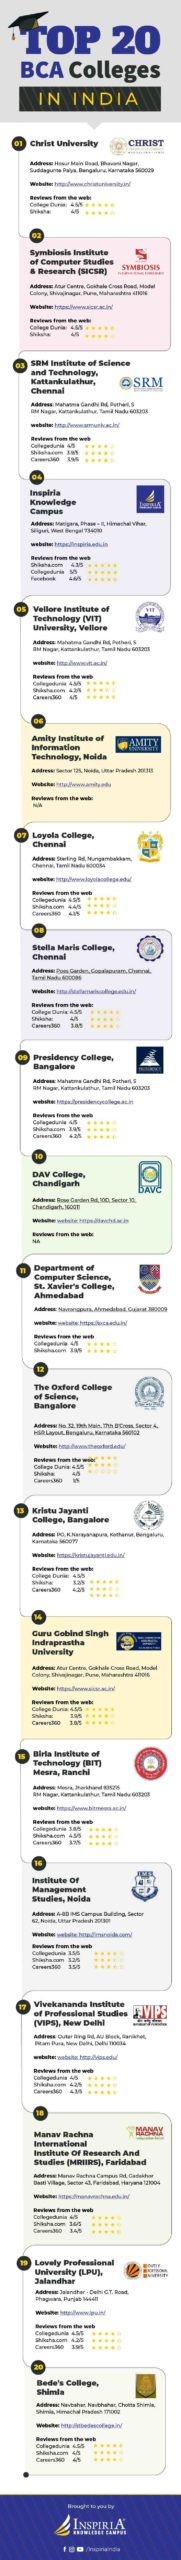 TOP 20 BCA Colleges in India Infographic